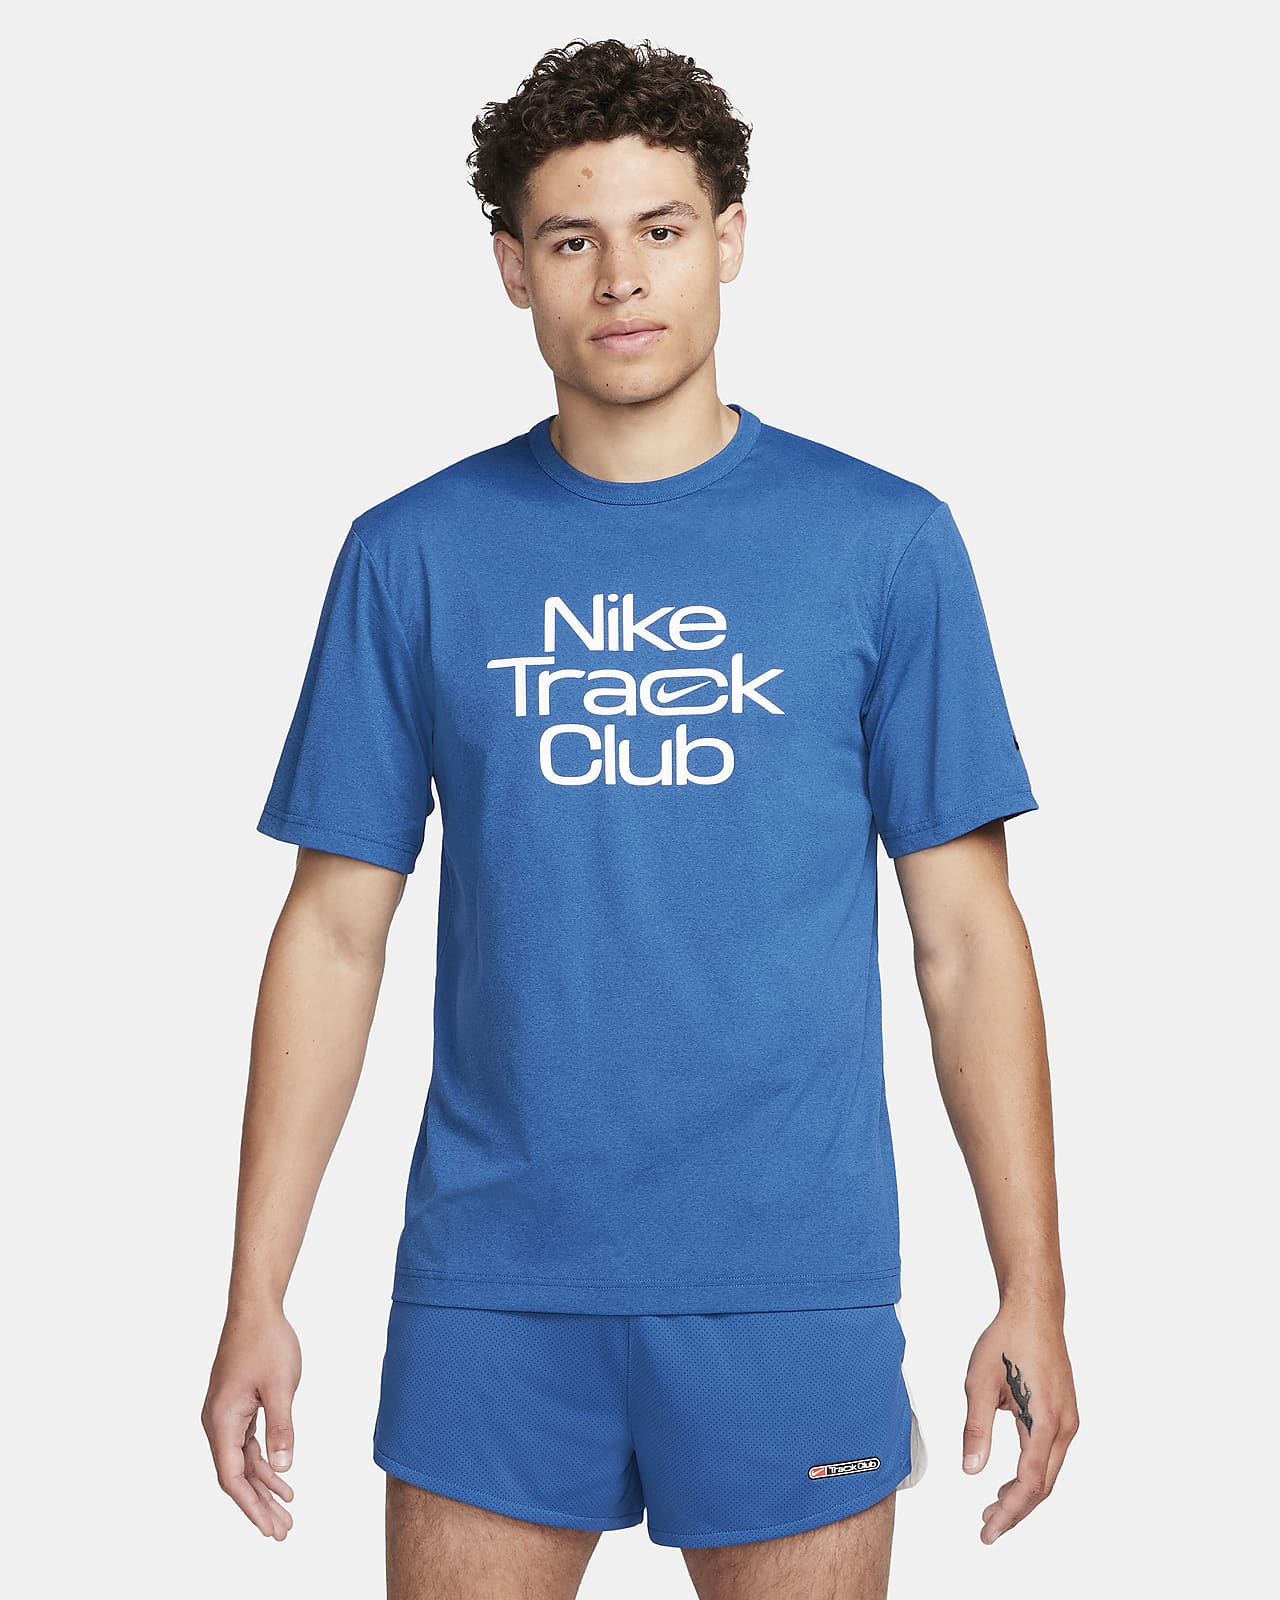 https://static.nike.com/a/images/t_PDP_1280_v1/f_auto,q_auto:eco/86a7967a-53e5-493f-9990-b0635836950f/track-club-mens-dri-fit-short-sleeve-running-top-HNd16Q.png